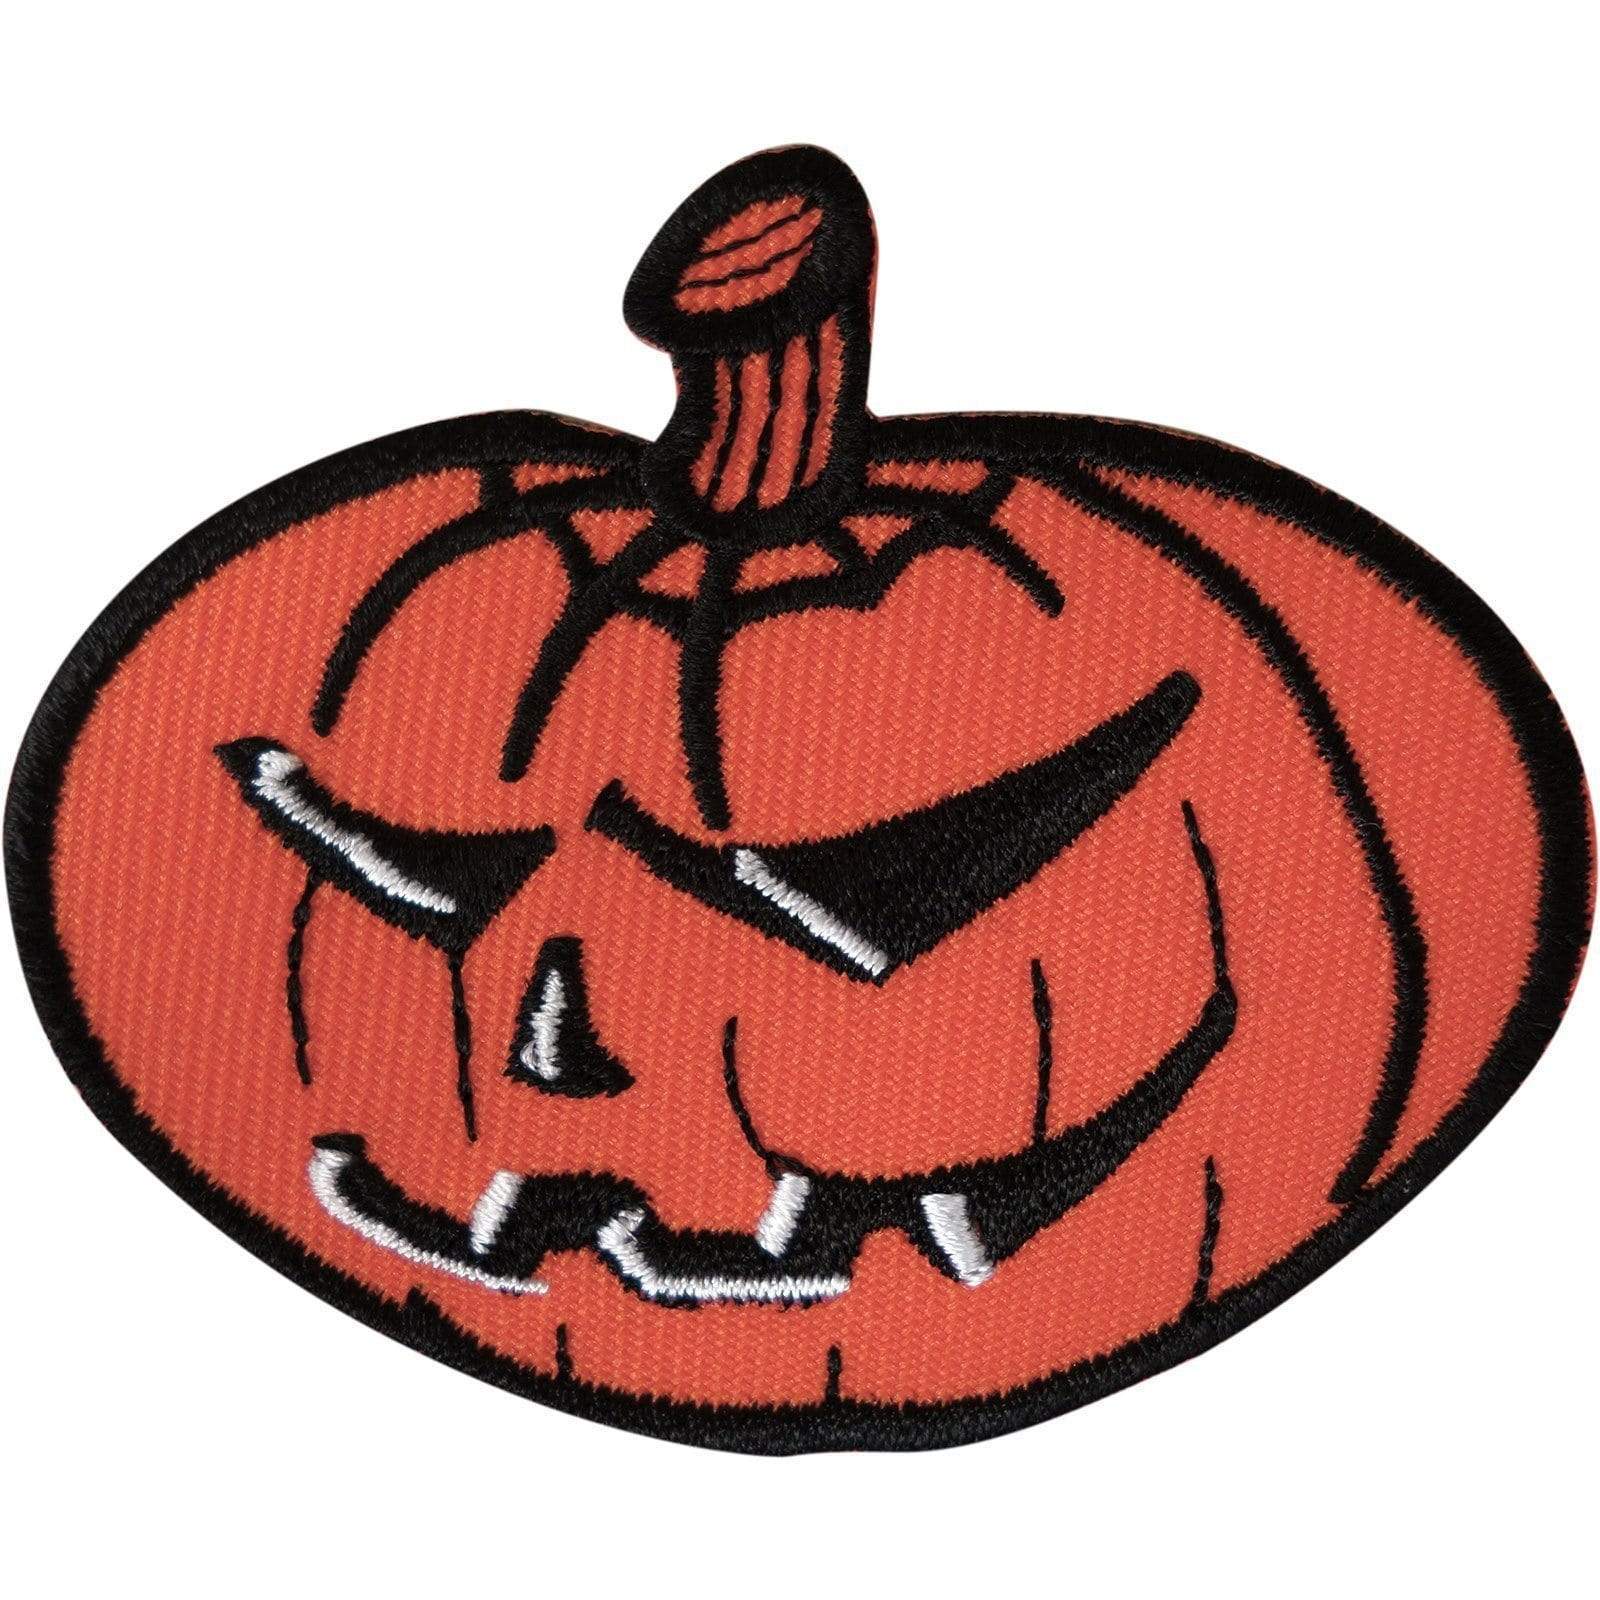 Pumpkin Iron On Patch Embroidered Badge Sew Embroidery Applique Halloween Crafts